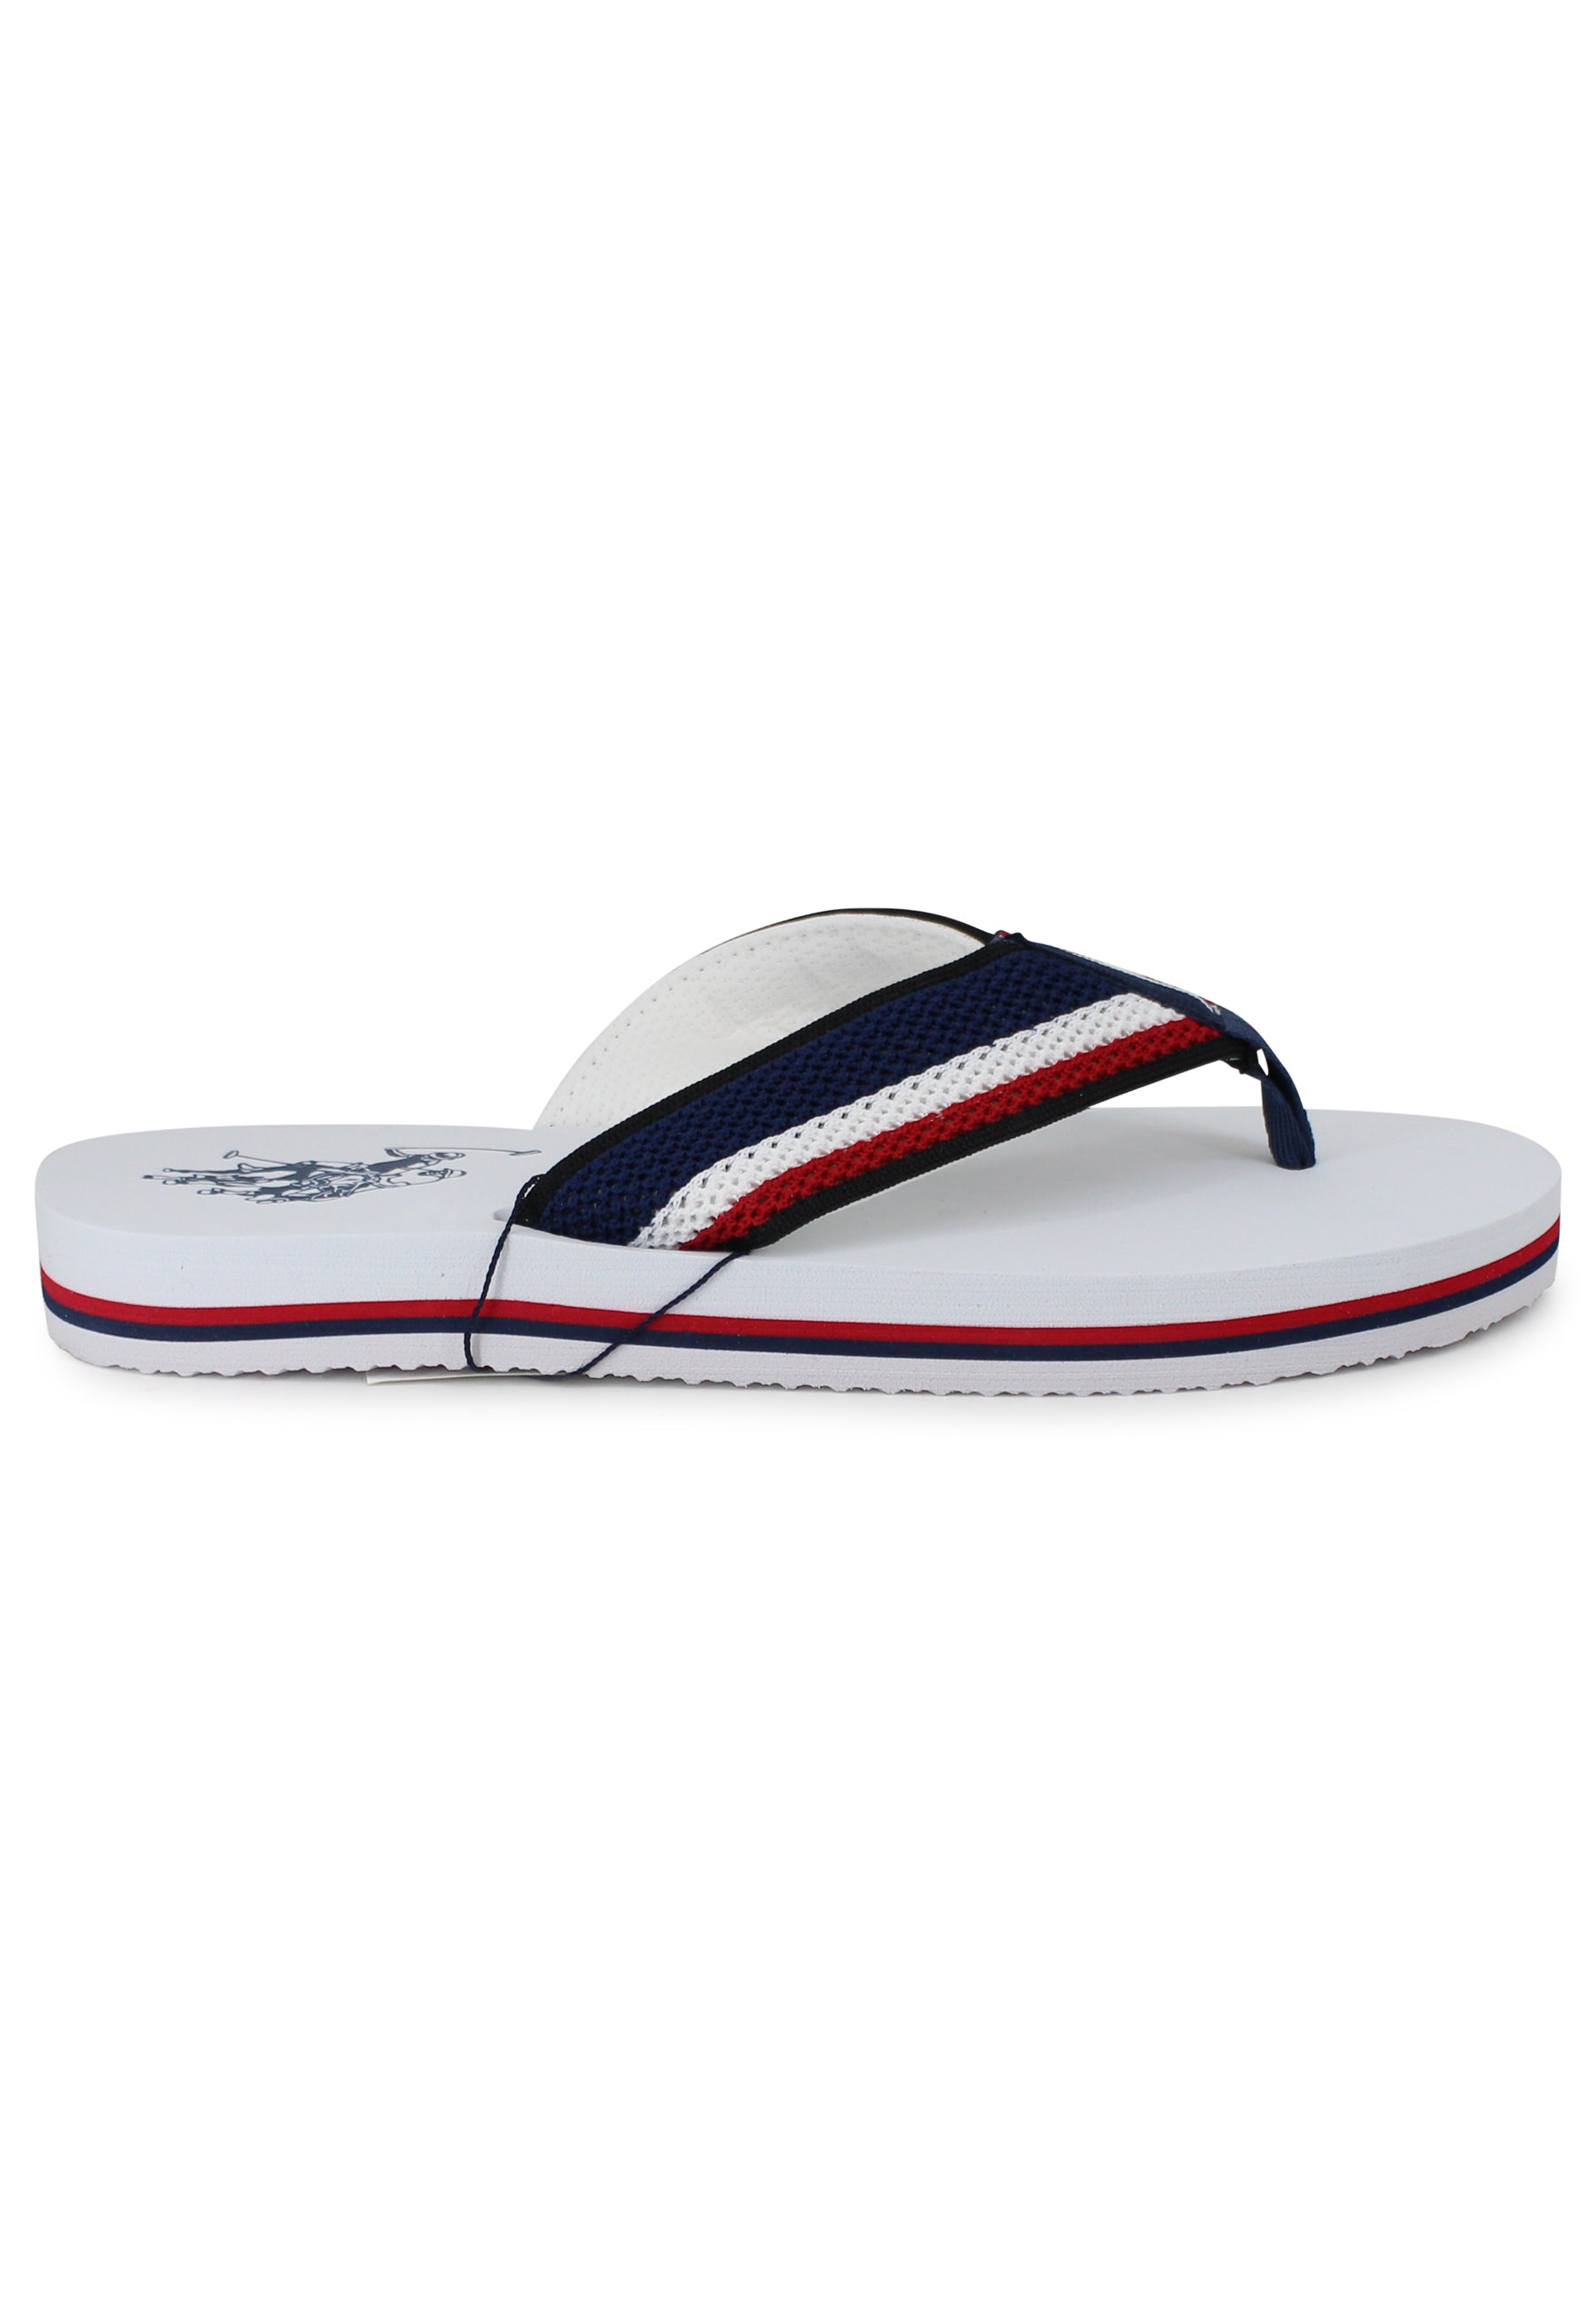 Men's flip flops in white fabric with light rubber sole